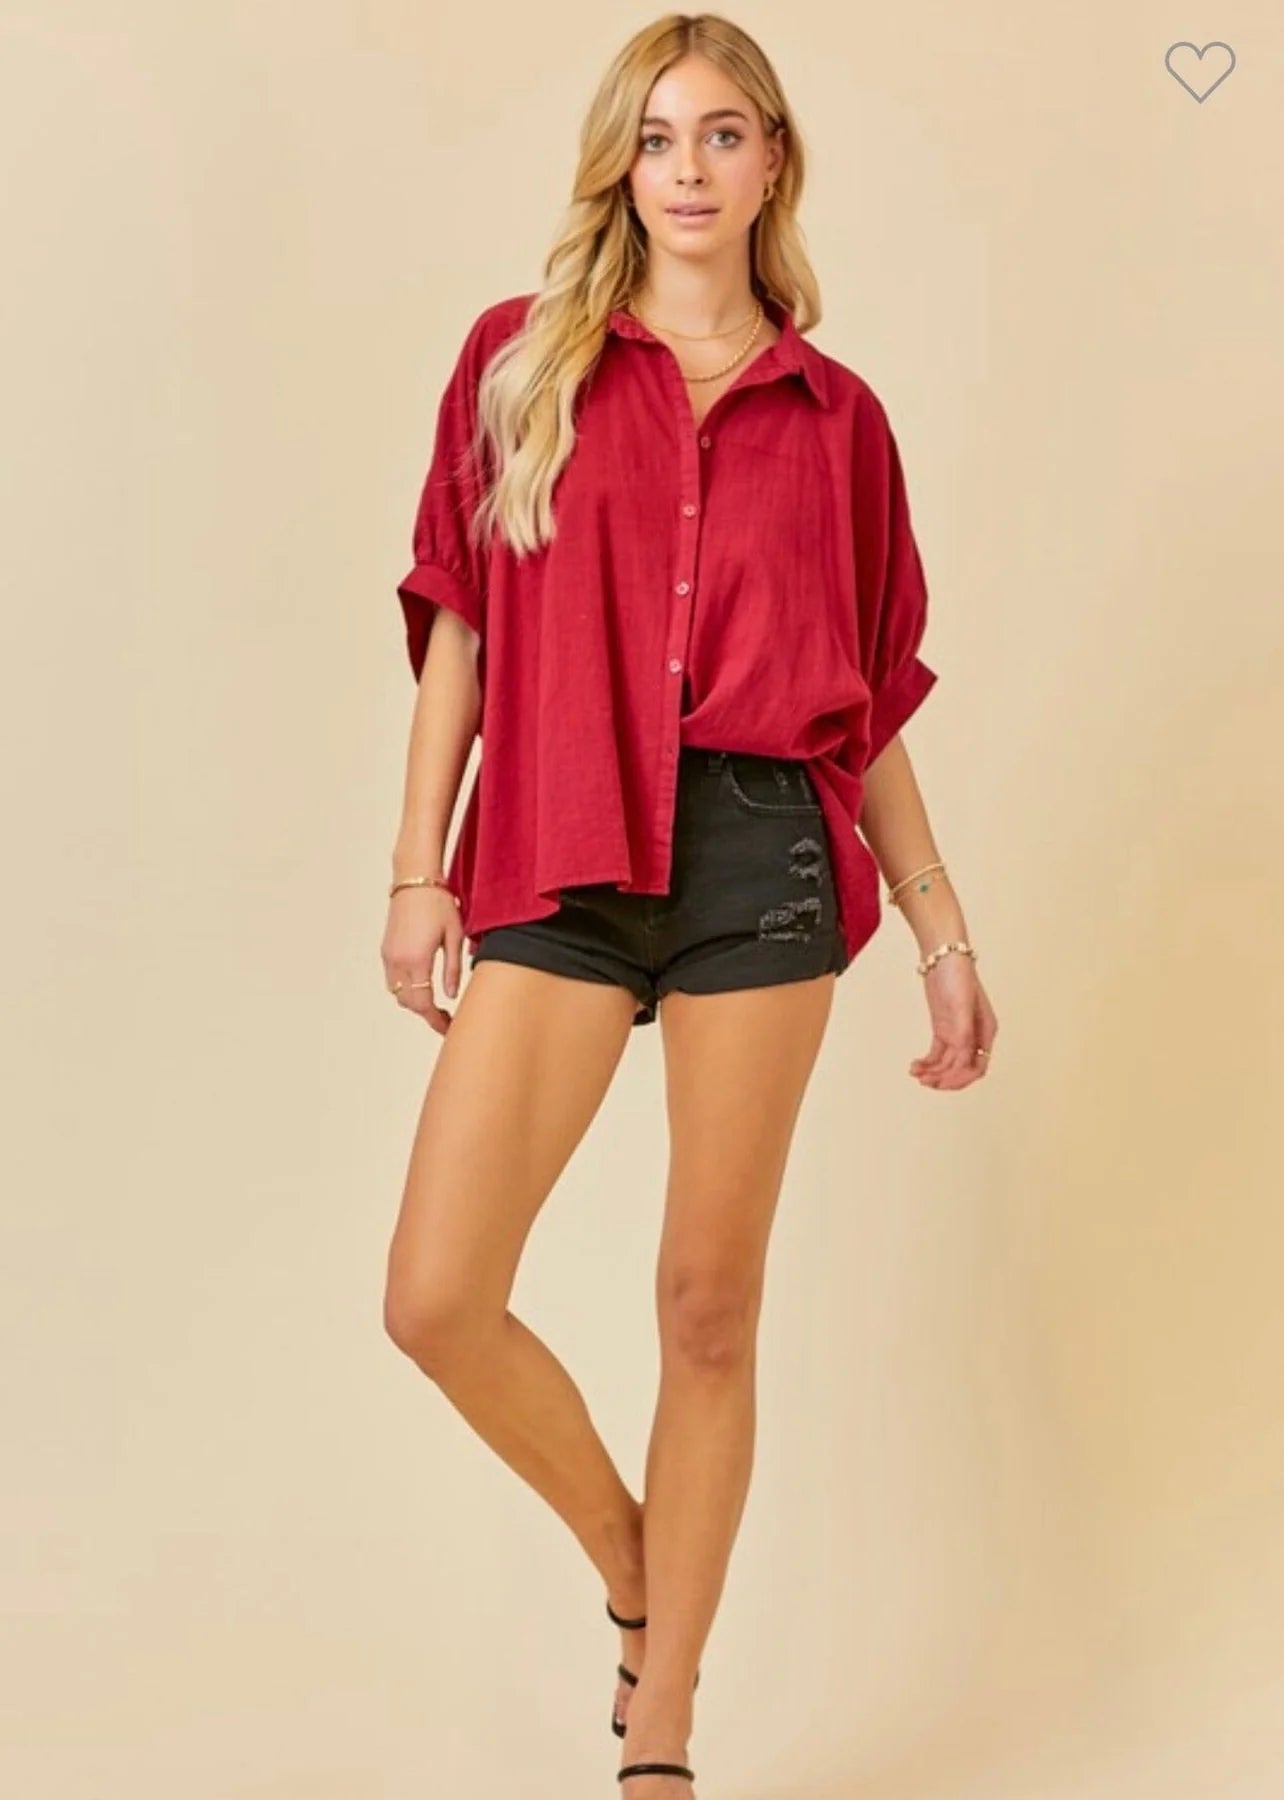 Red Wine Oversized Blouse